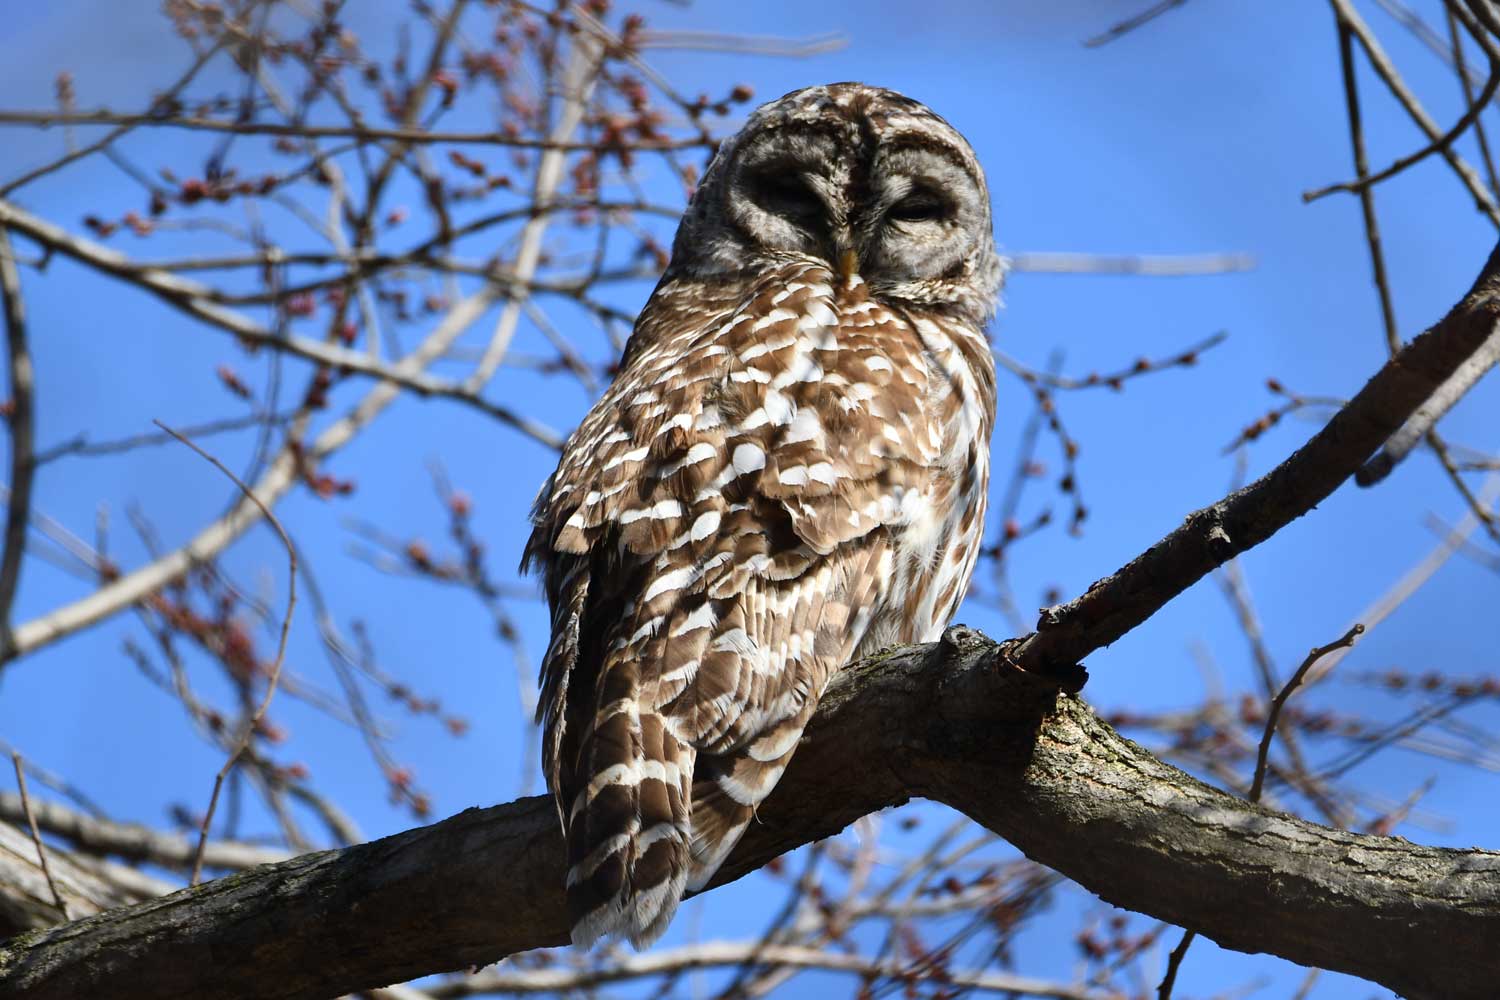 Barred owl perched on a branch.